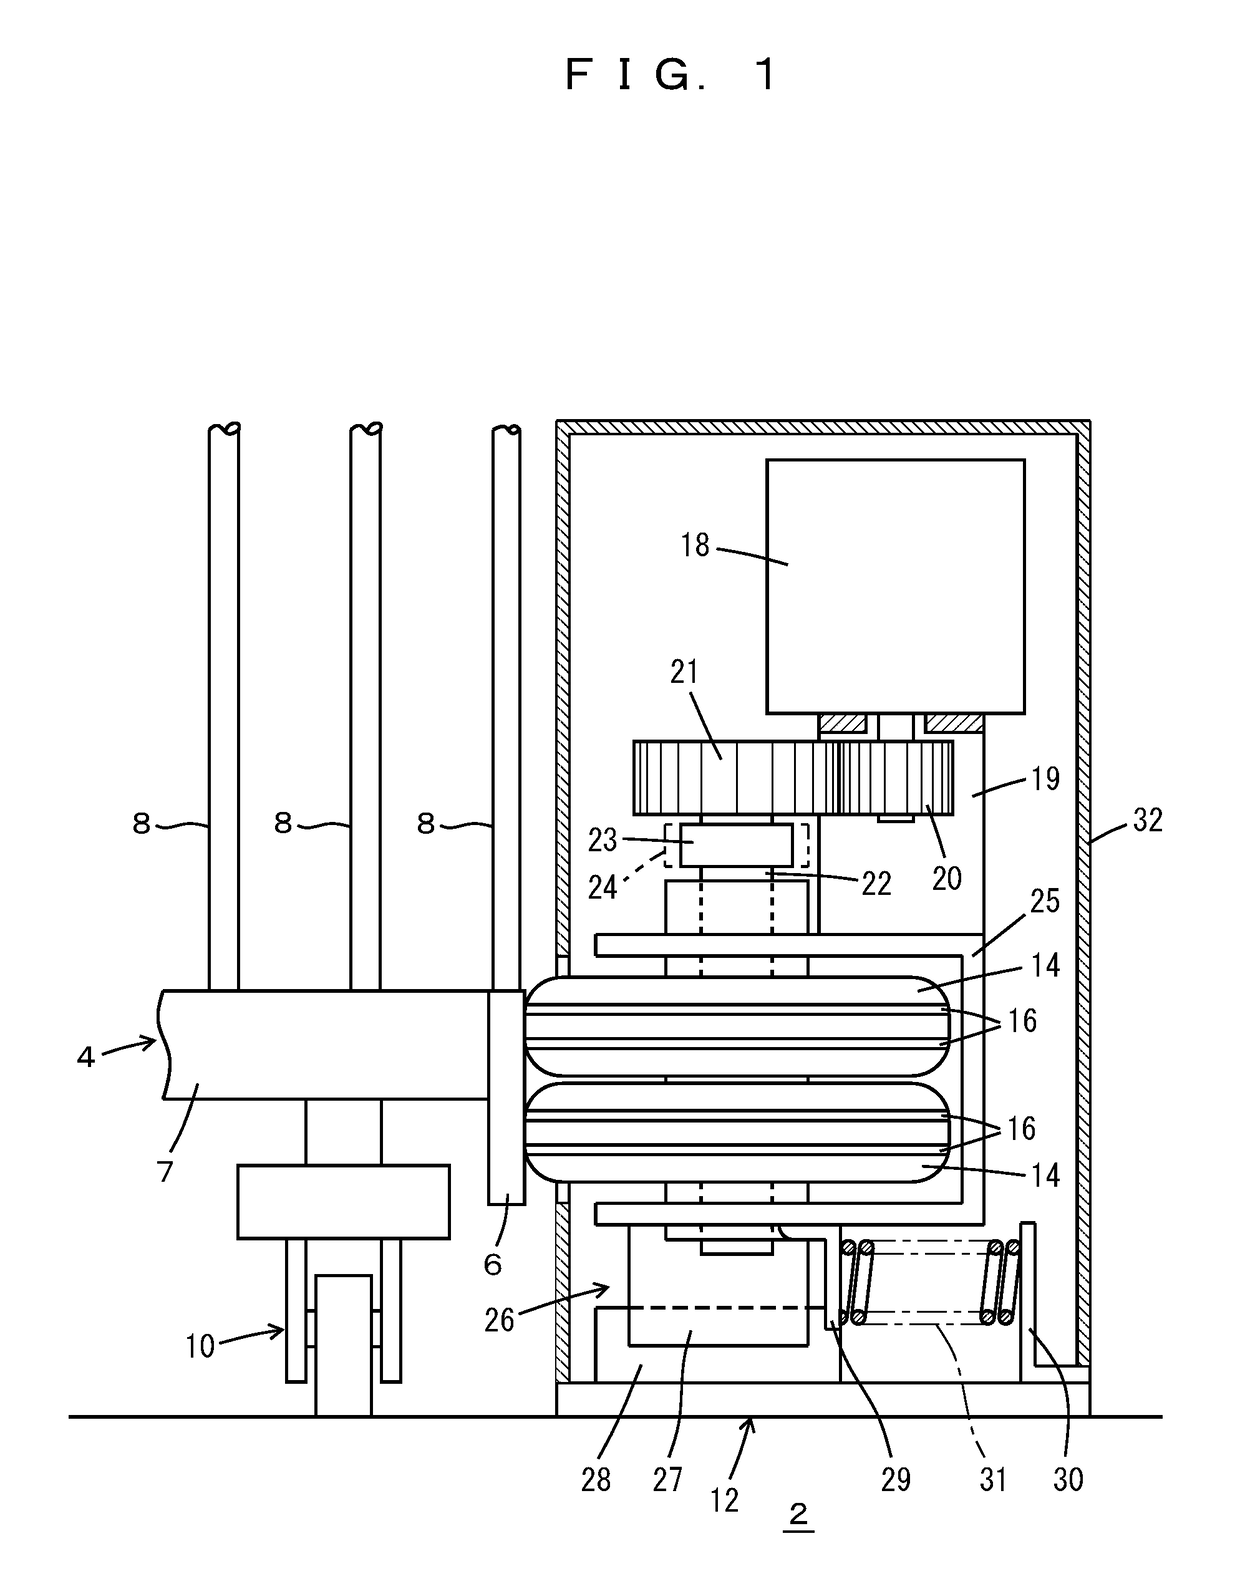 Truck transporting device